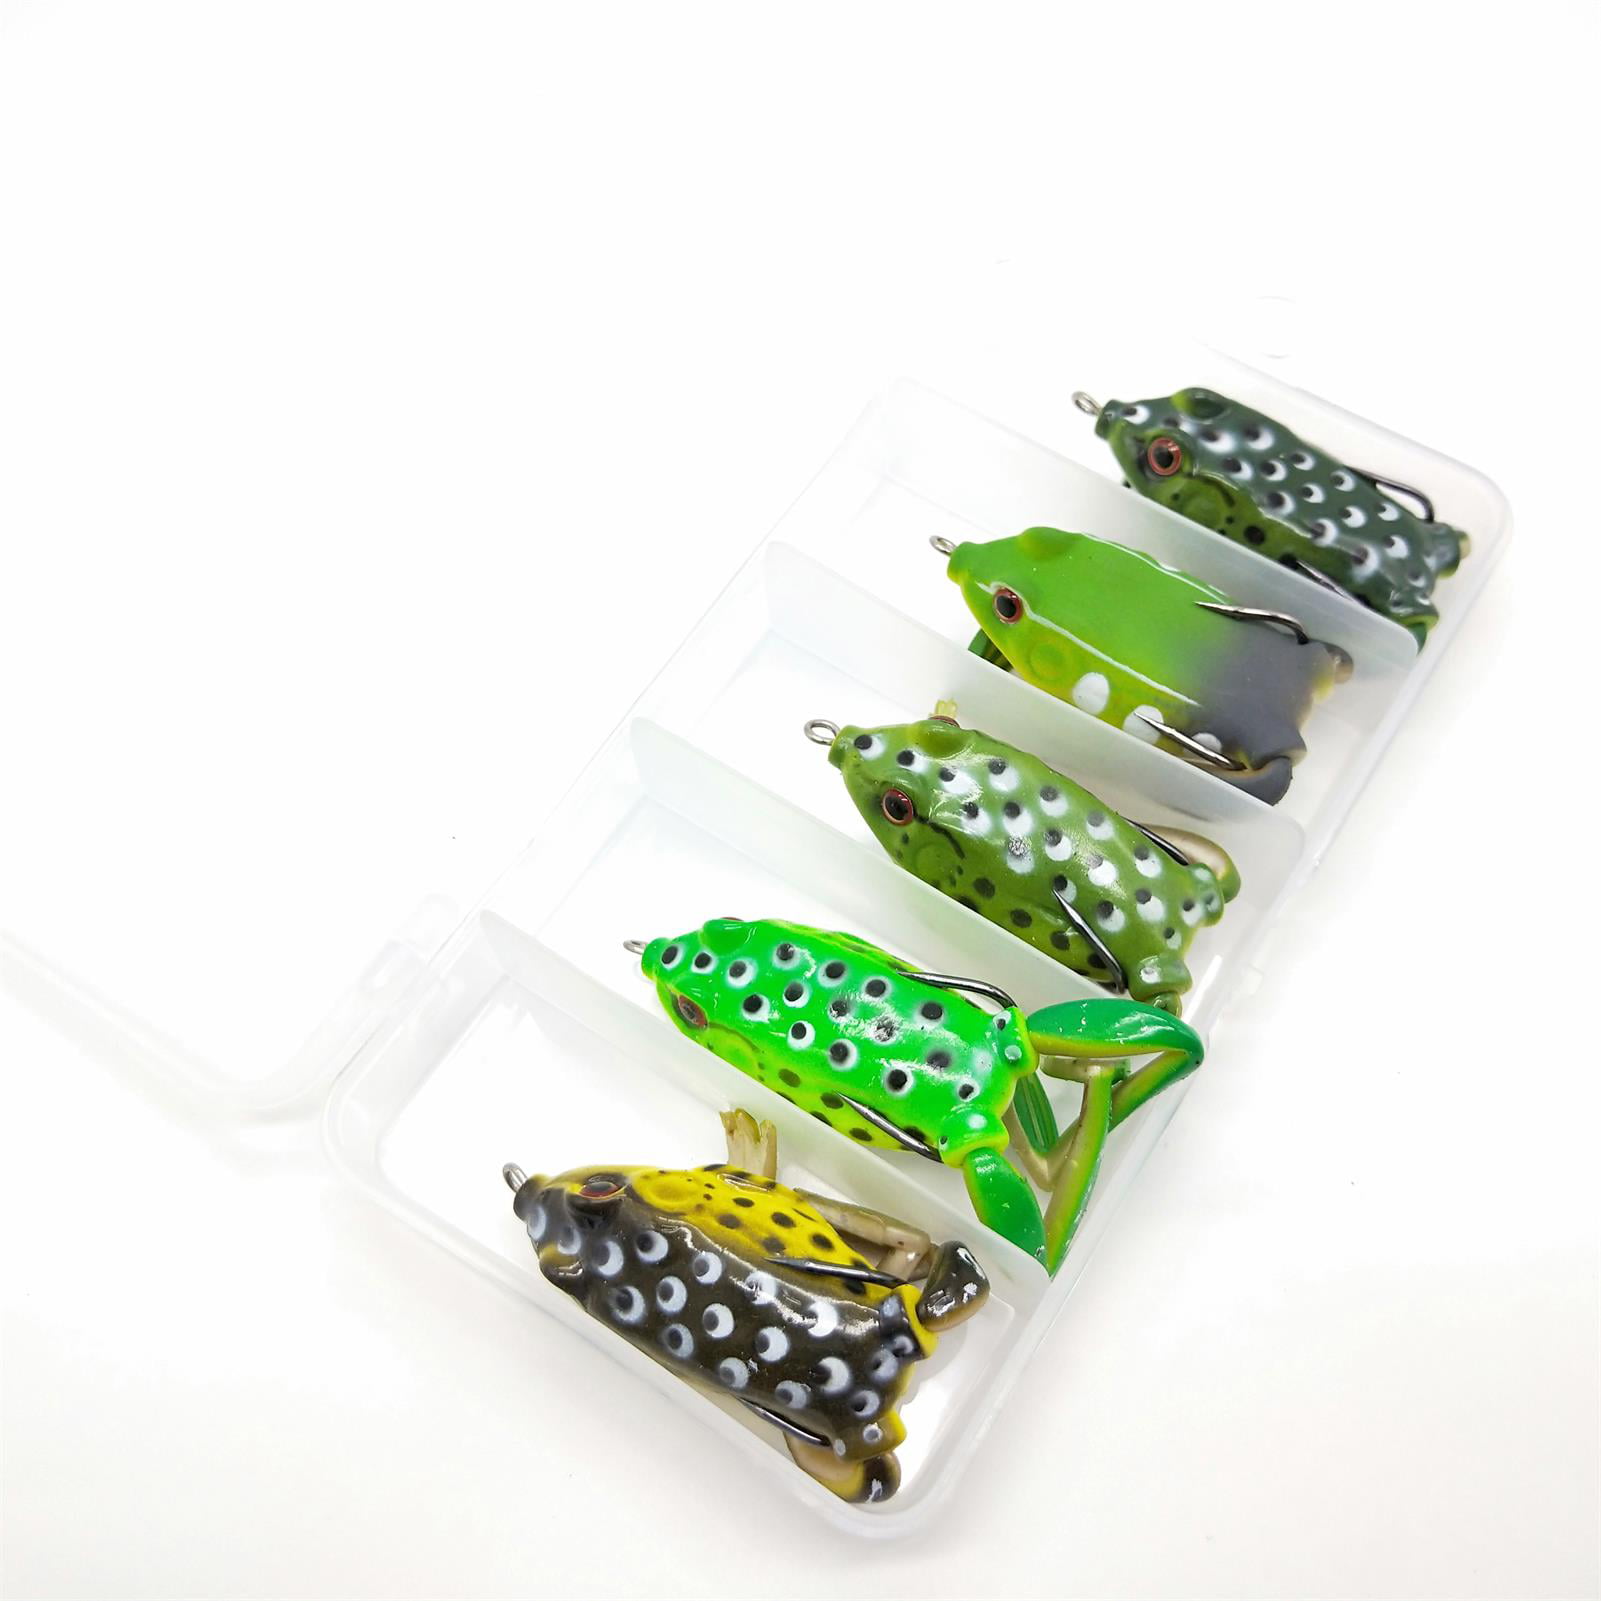 5pcs Realistic Soft Plastic Frog Lure With 3D Eyes And Fishing Hooks -  Perfect For Bass Fishing And Topwater Action